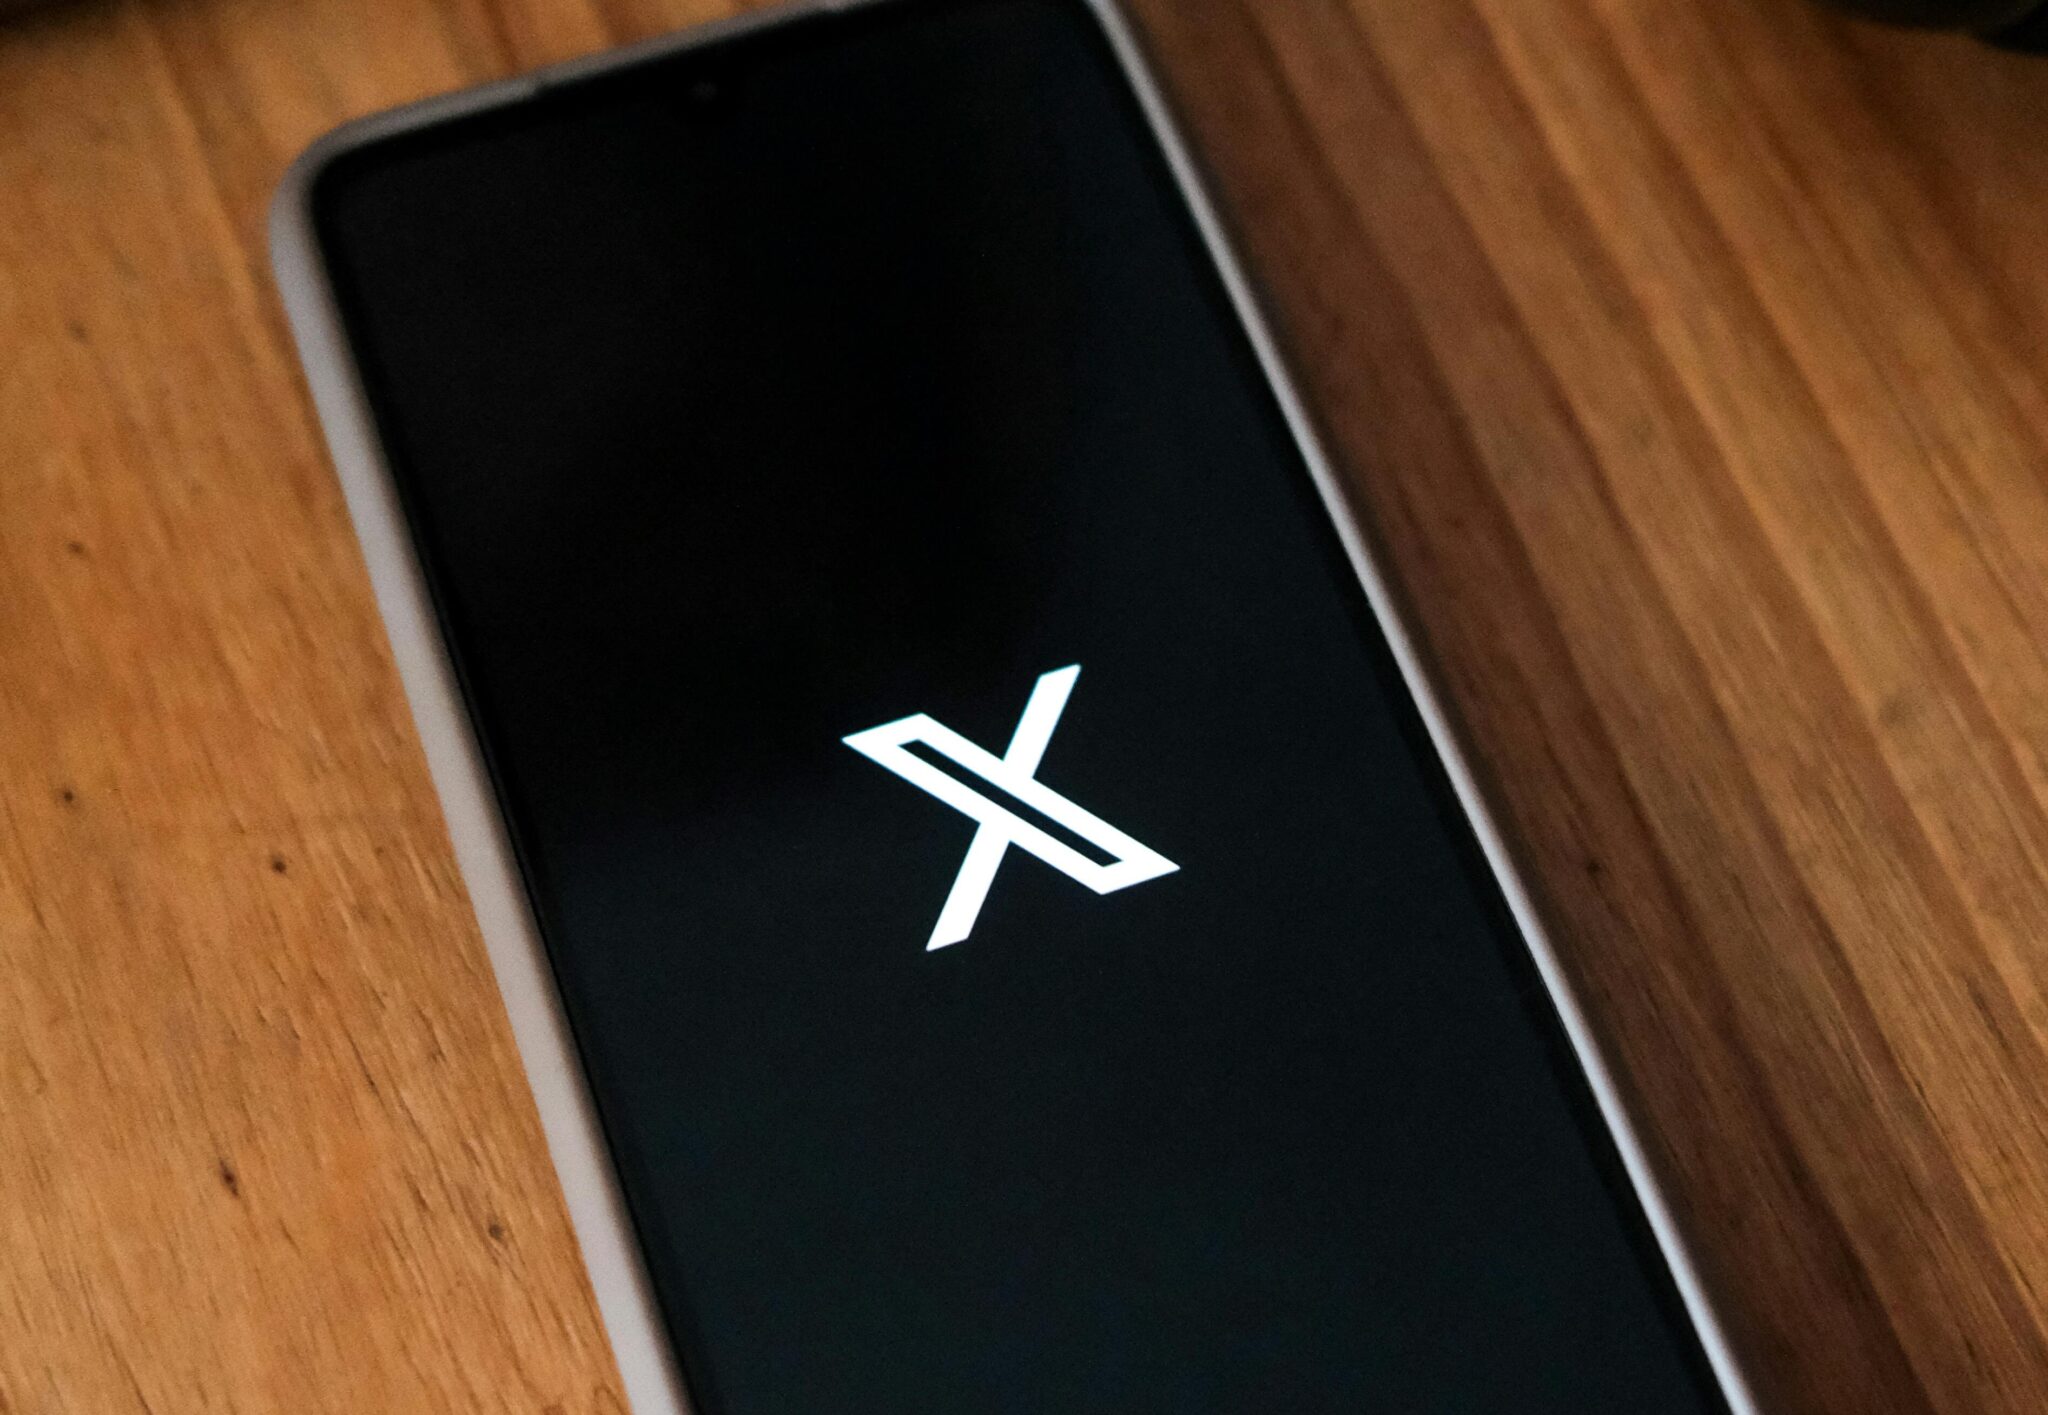 X formally allows X-rated content on platform